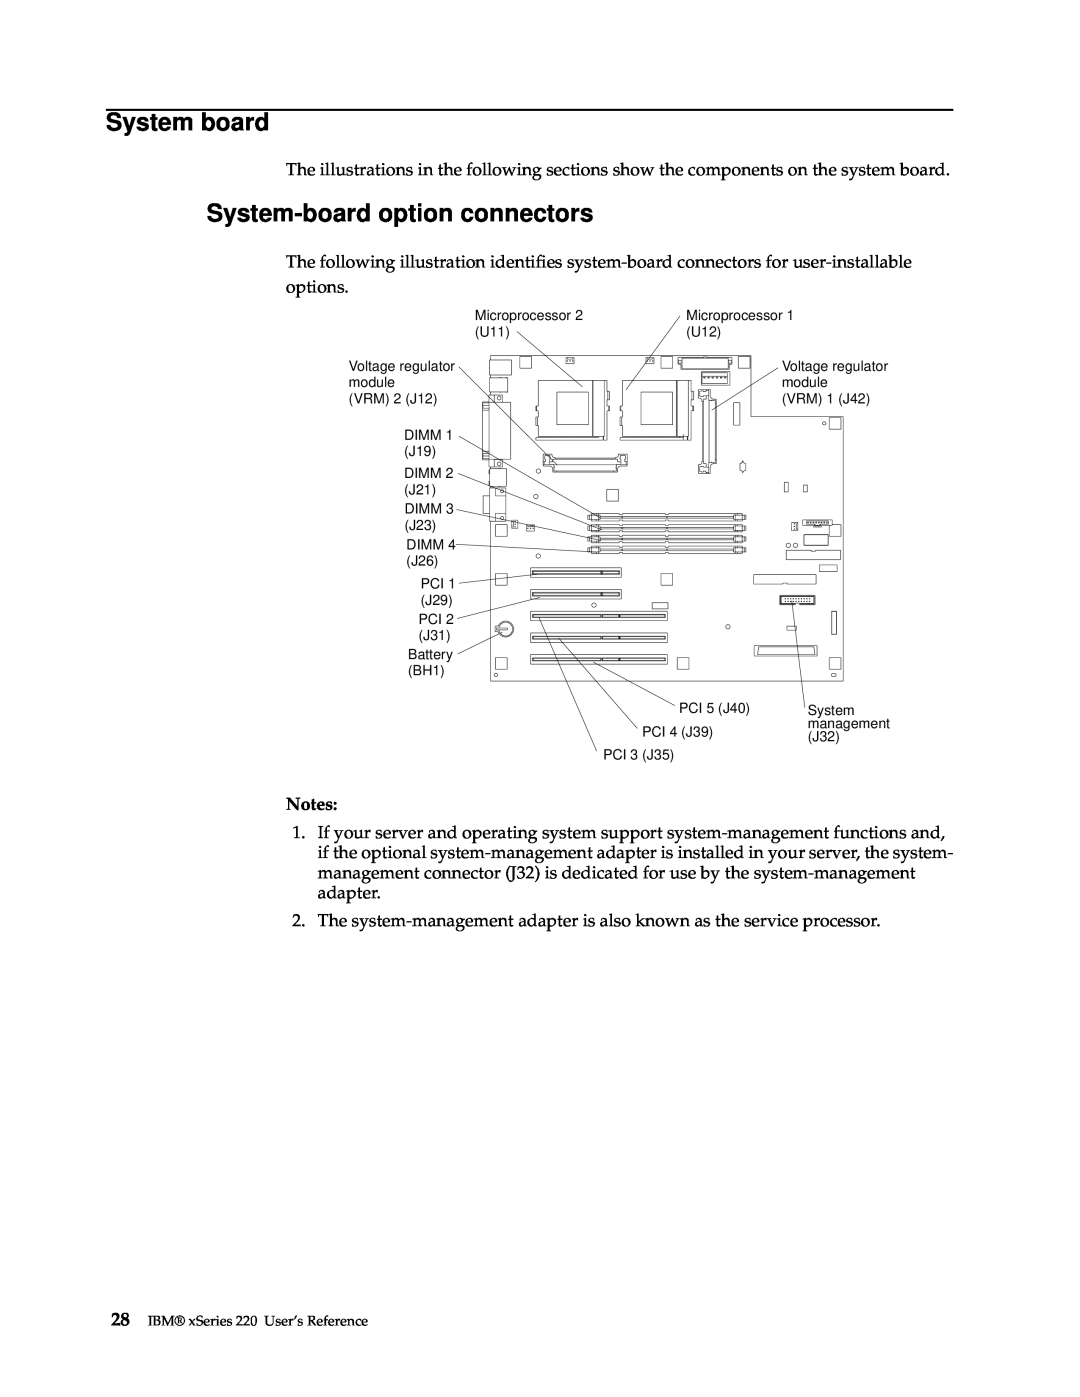 IBM manual System board, System-board option connectors, IBM xSeries 220 User’s Reference 